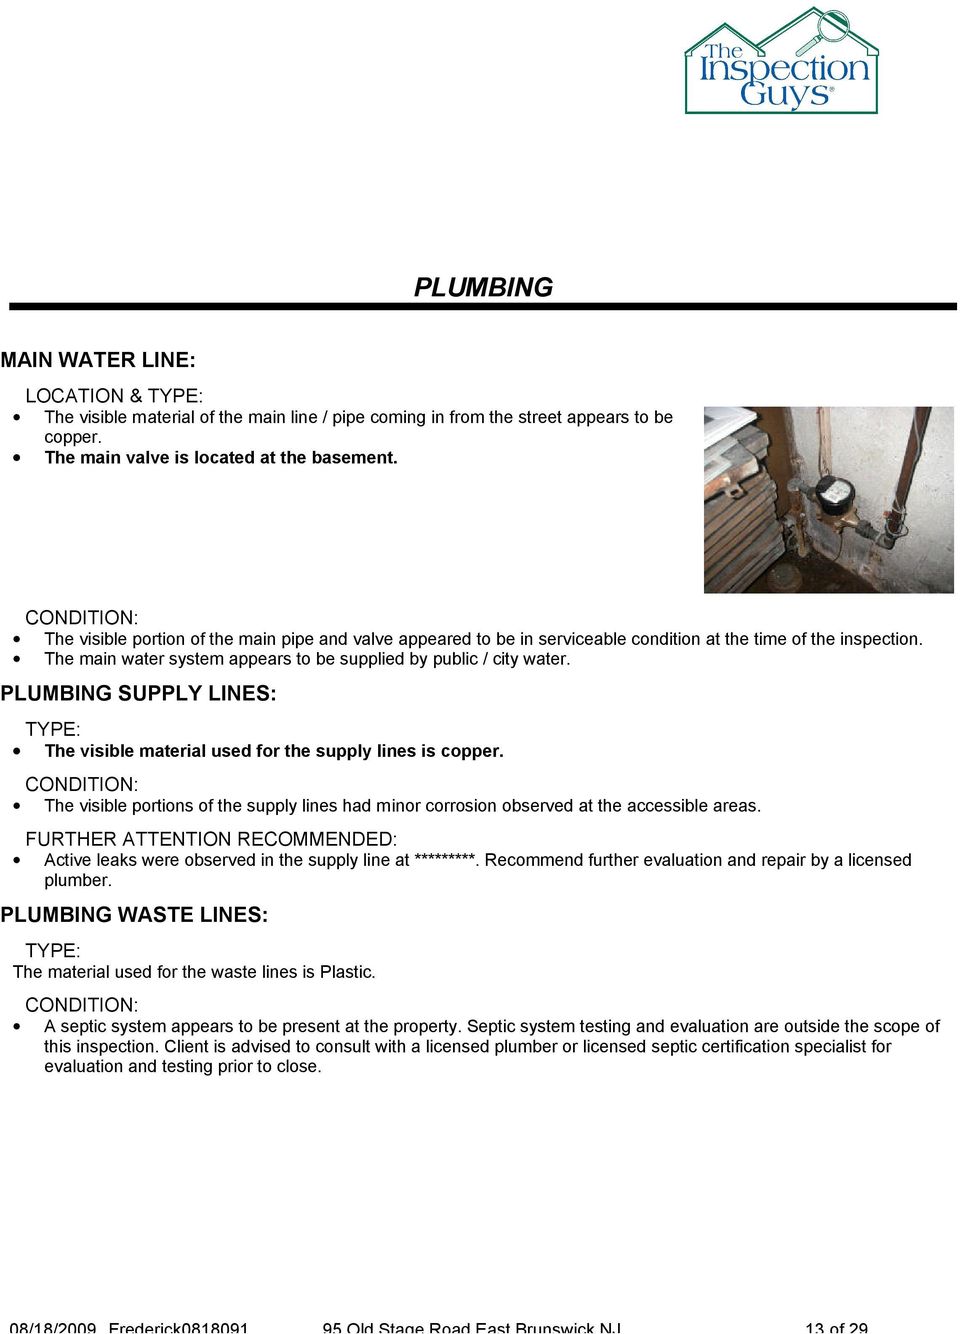 PLUMBING SUPPLY LINES: TYPE: The visible material used for the supply lines is copper. The visible portions of the supply lines had minor corrosion observed at the accessible areas.